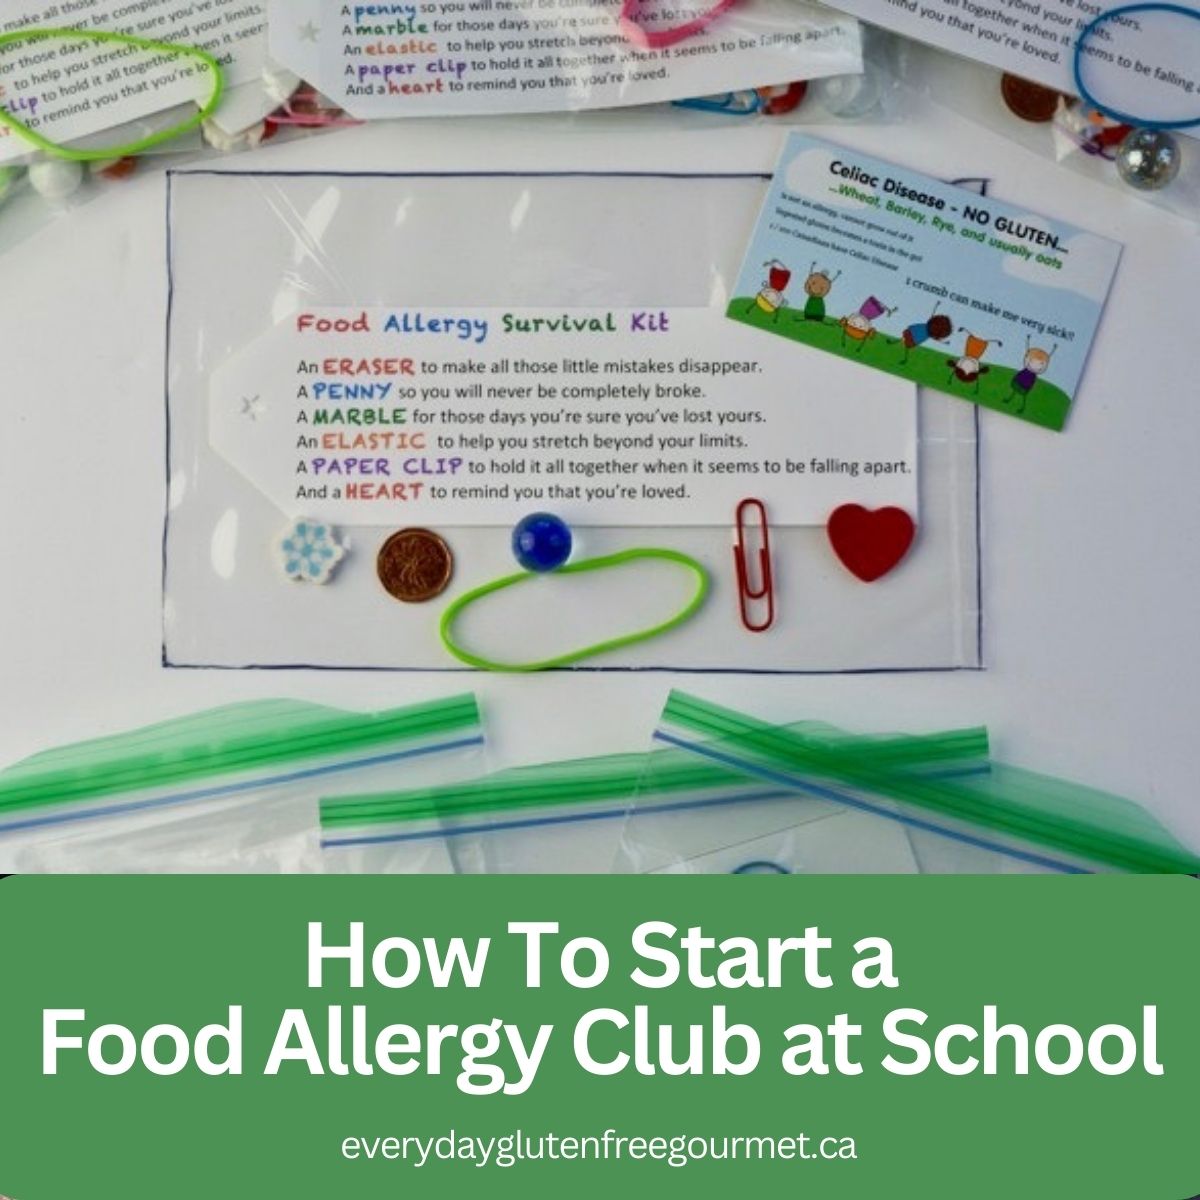 Food Allergy Survival Kits made with an eraser, a penny, a marble, a elastic, a paper clip and a small heart to match the saying on the printed card inside.